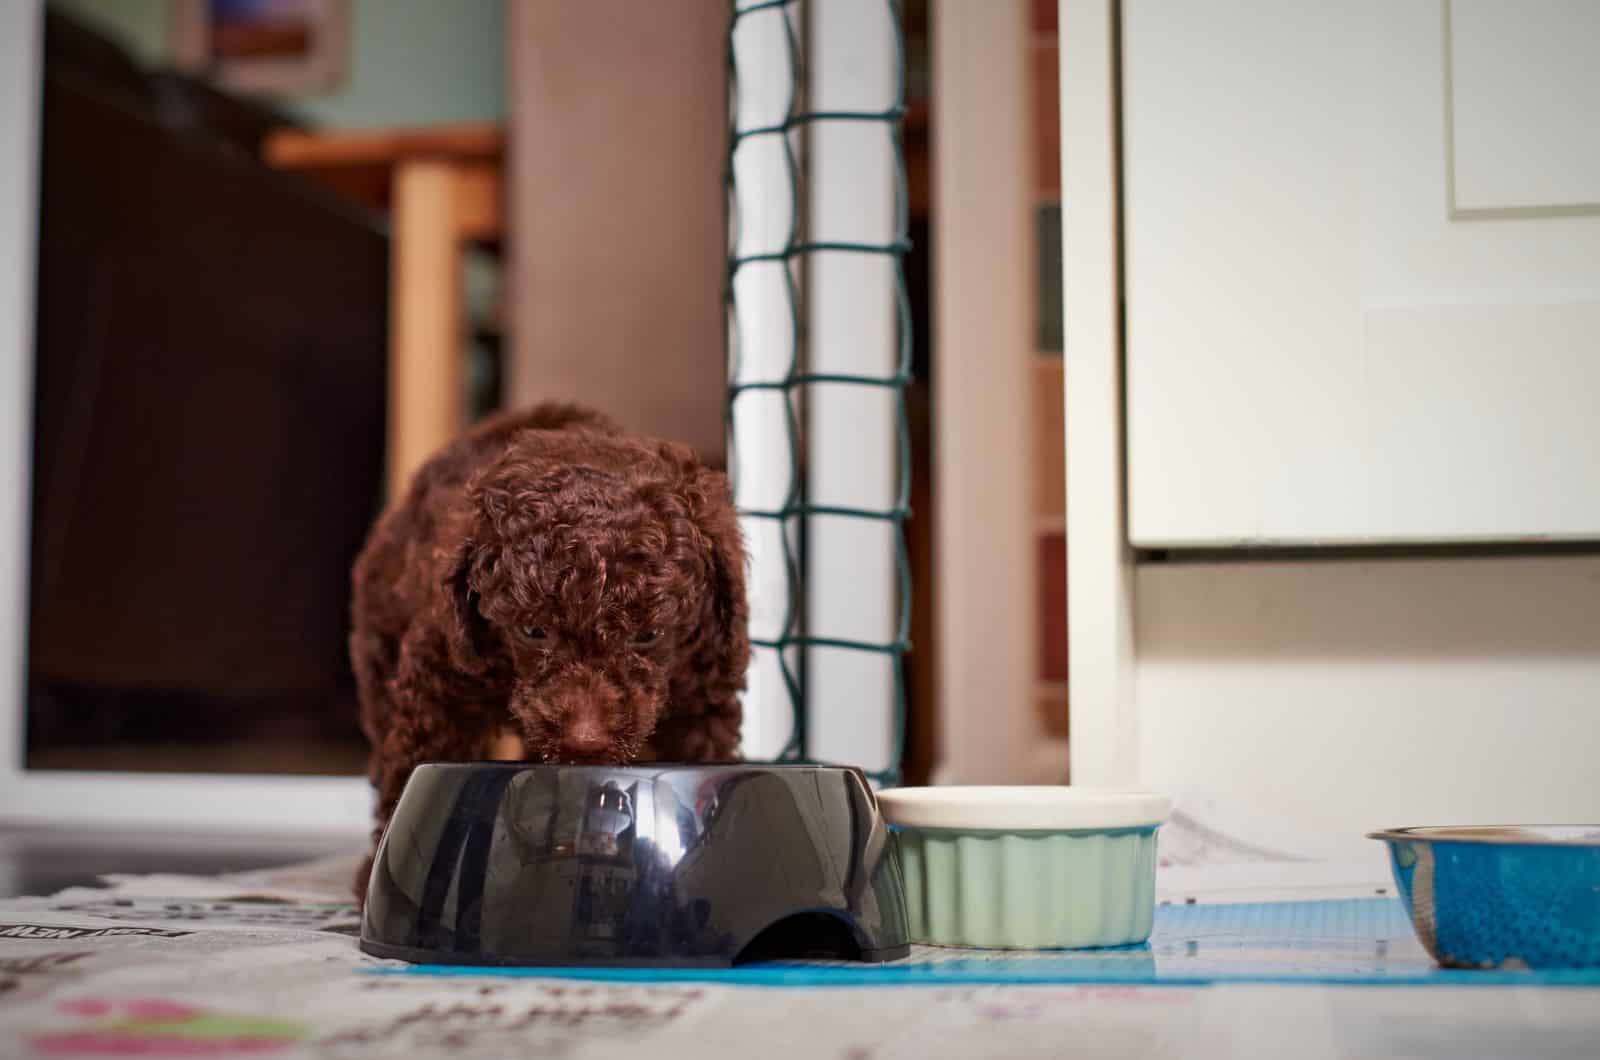 Poodle eating from bowl